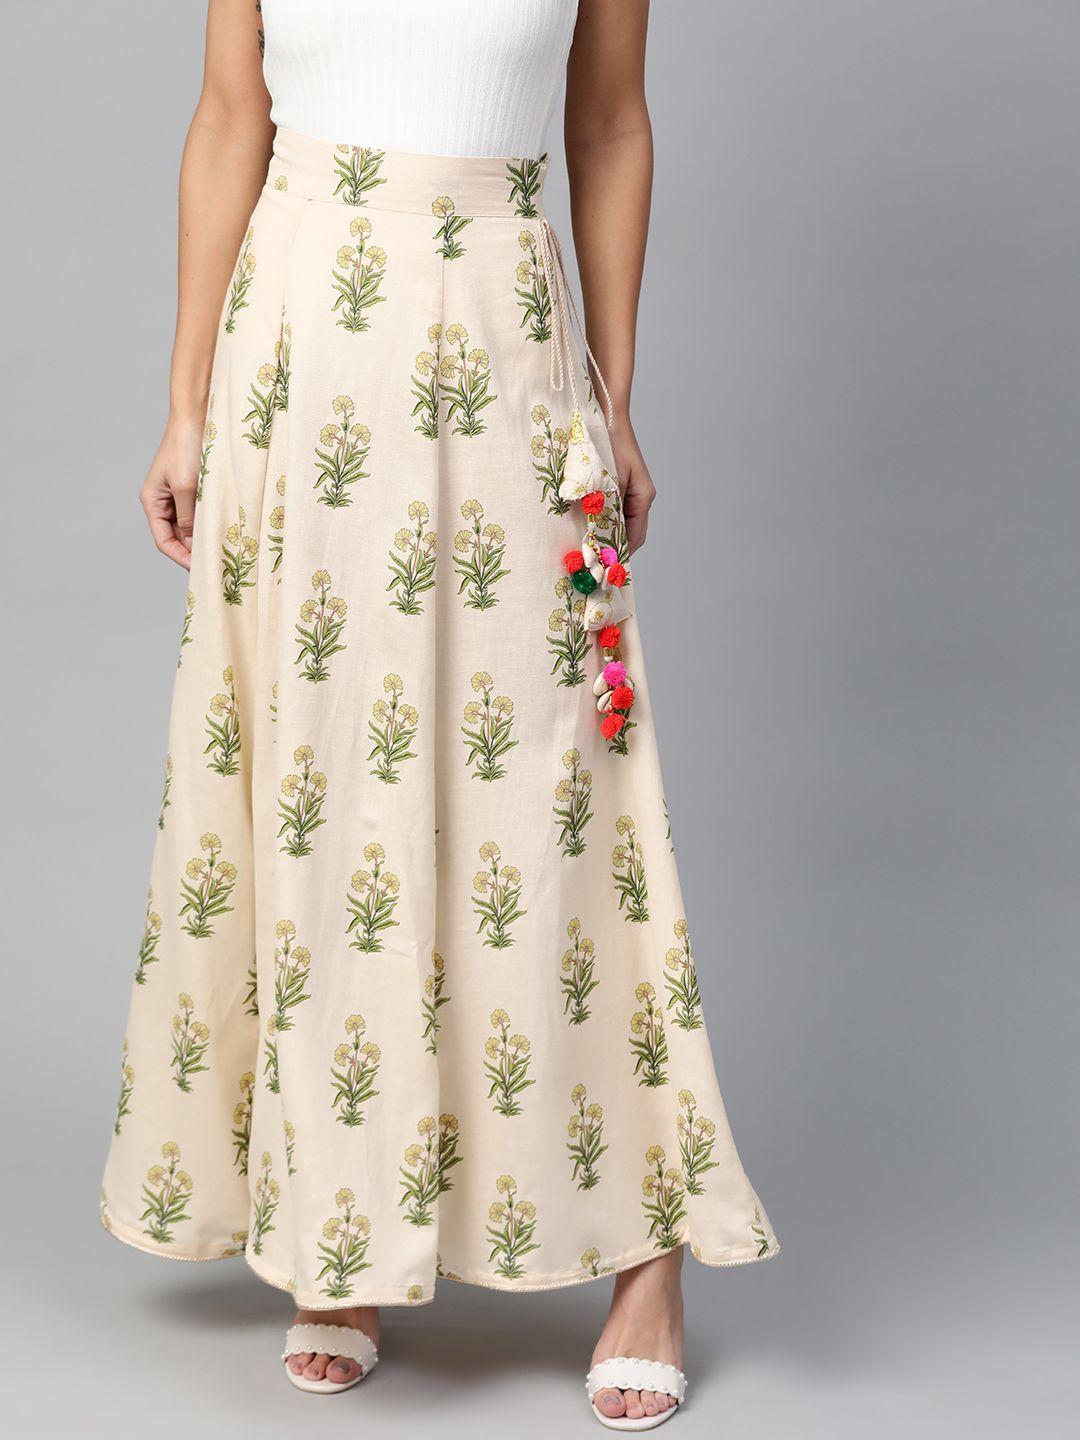 here&now women cream-coloured & green printed flared maxi skirt